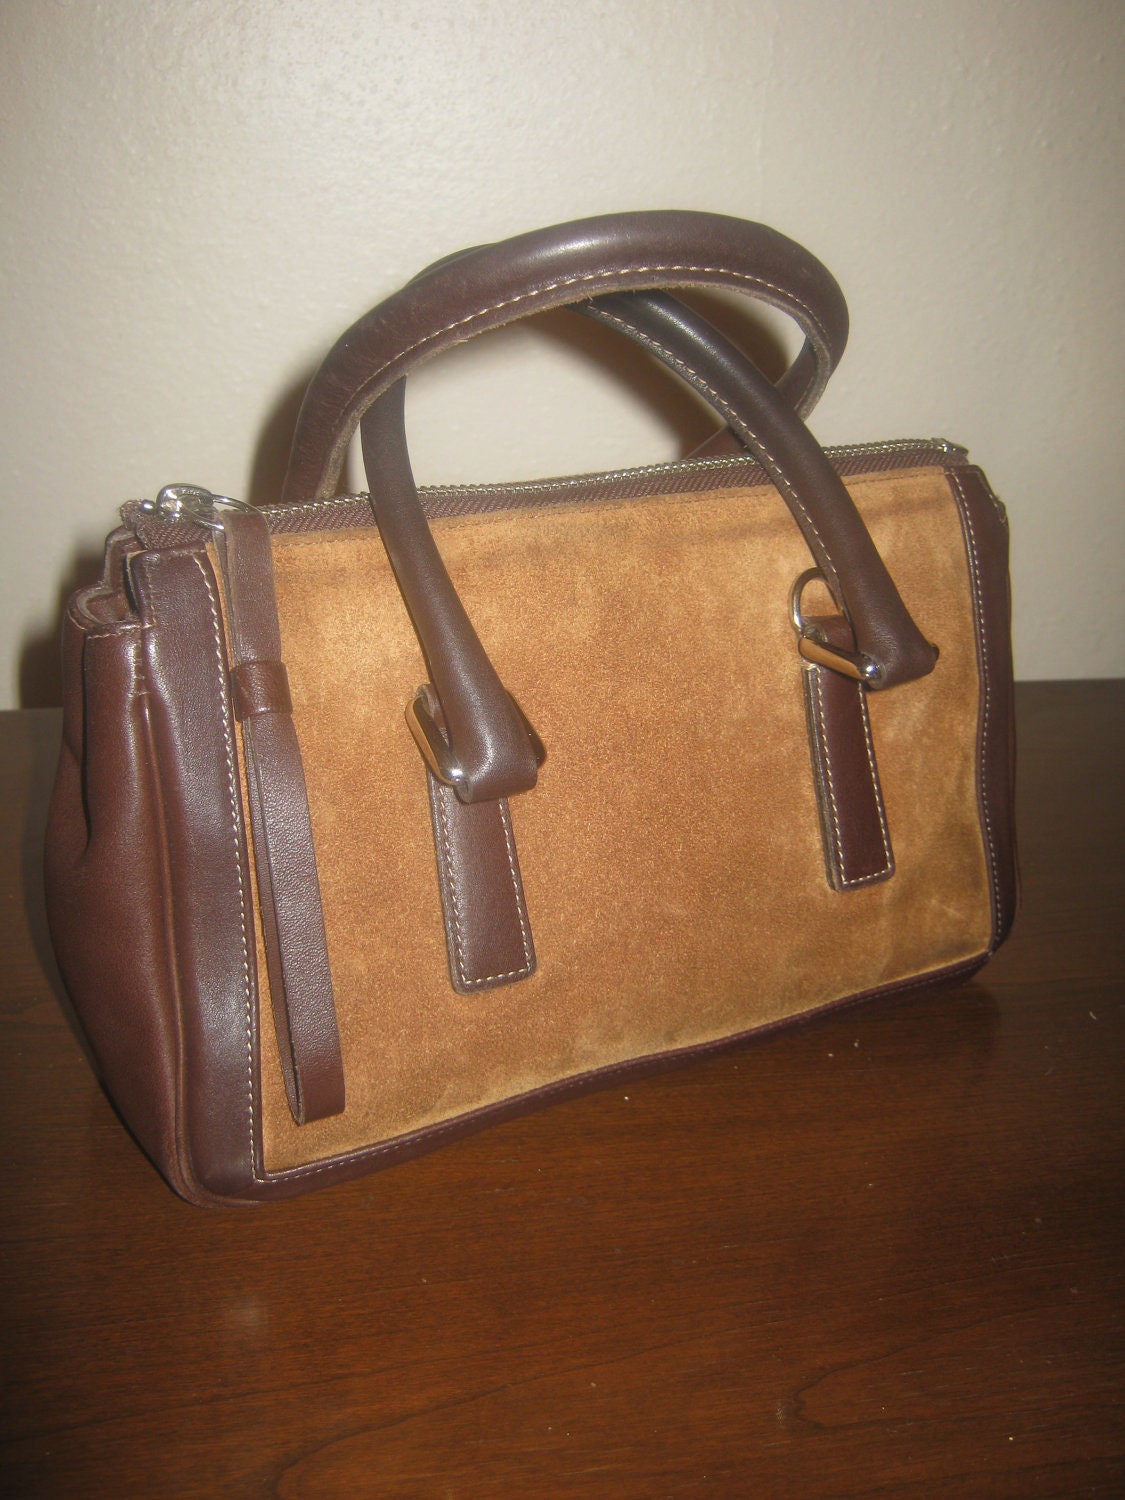 Vintage Coach Leather/Suede Small Handbag by Ms2SweetVintage